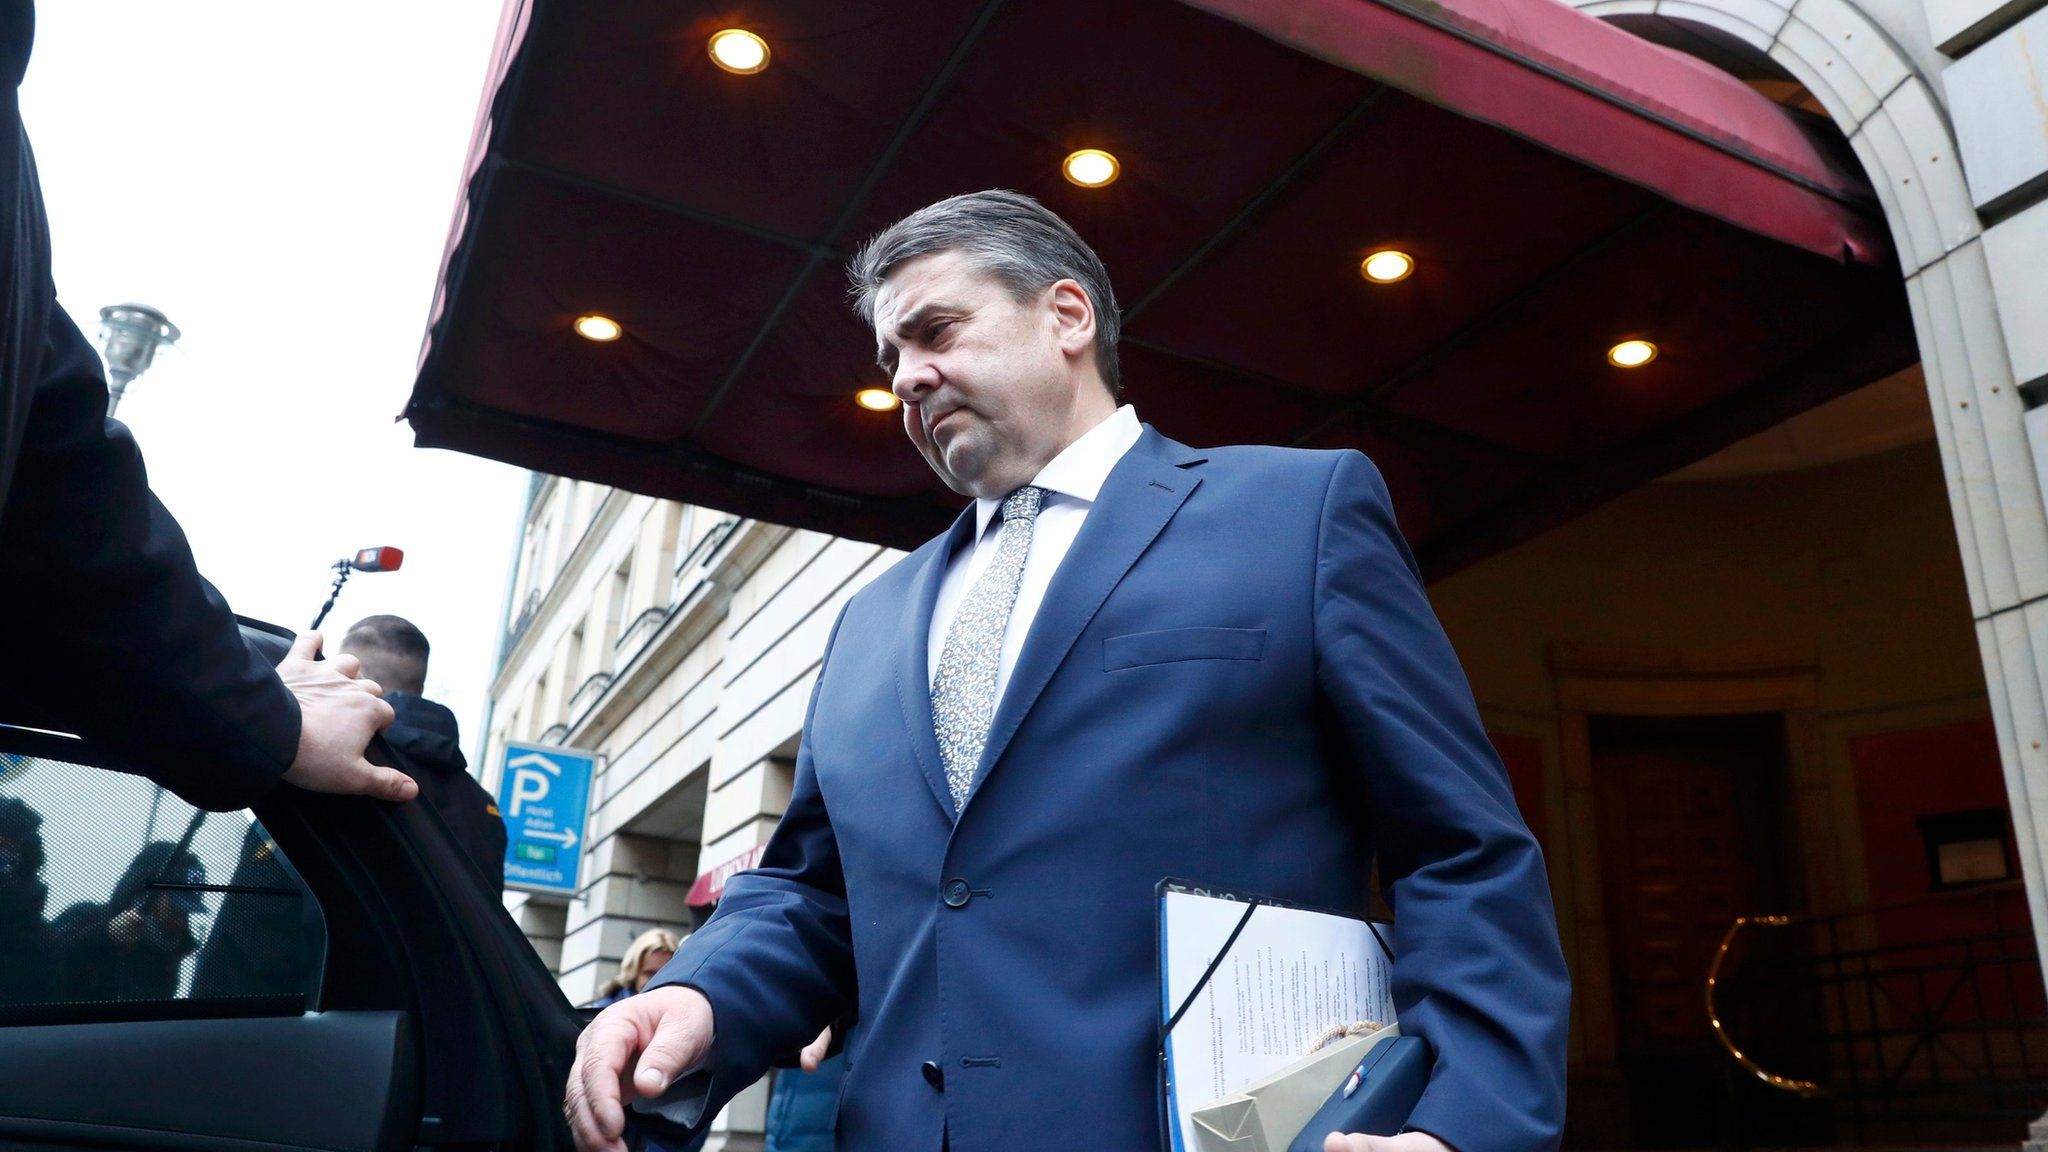 German Foreign Minister Sigmar Gabriel leaves Adlon hotel after meeting Turkish Foreign Minister Mevlut Cavusoglu in Berlin, Germany, 8 March 2017